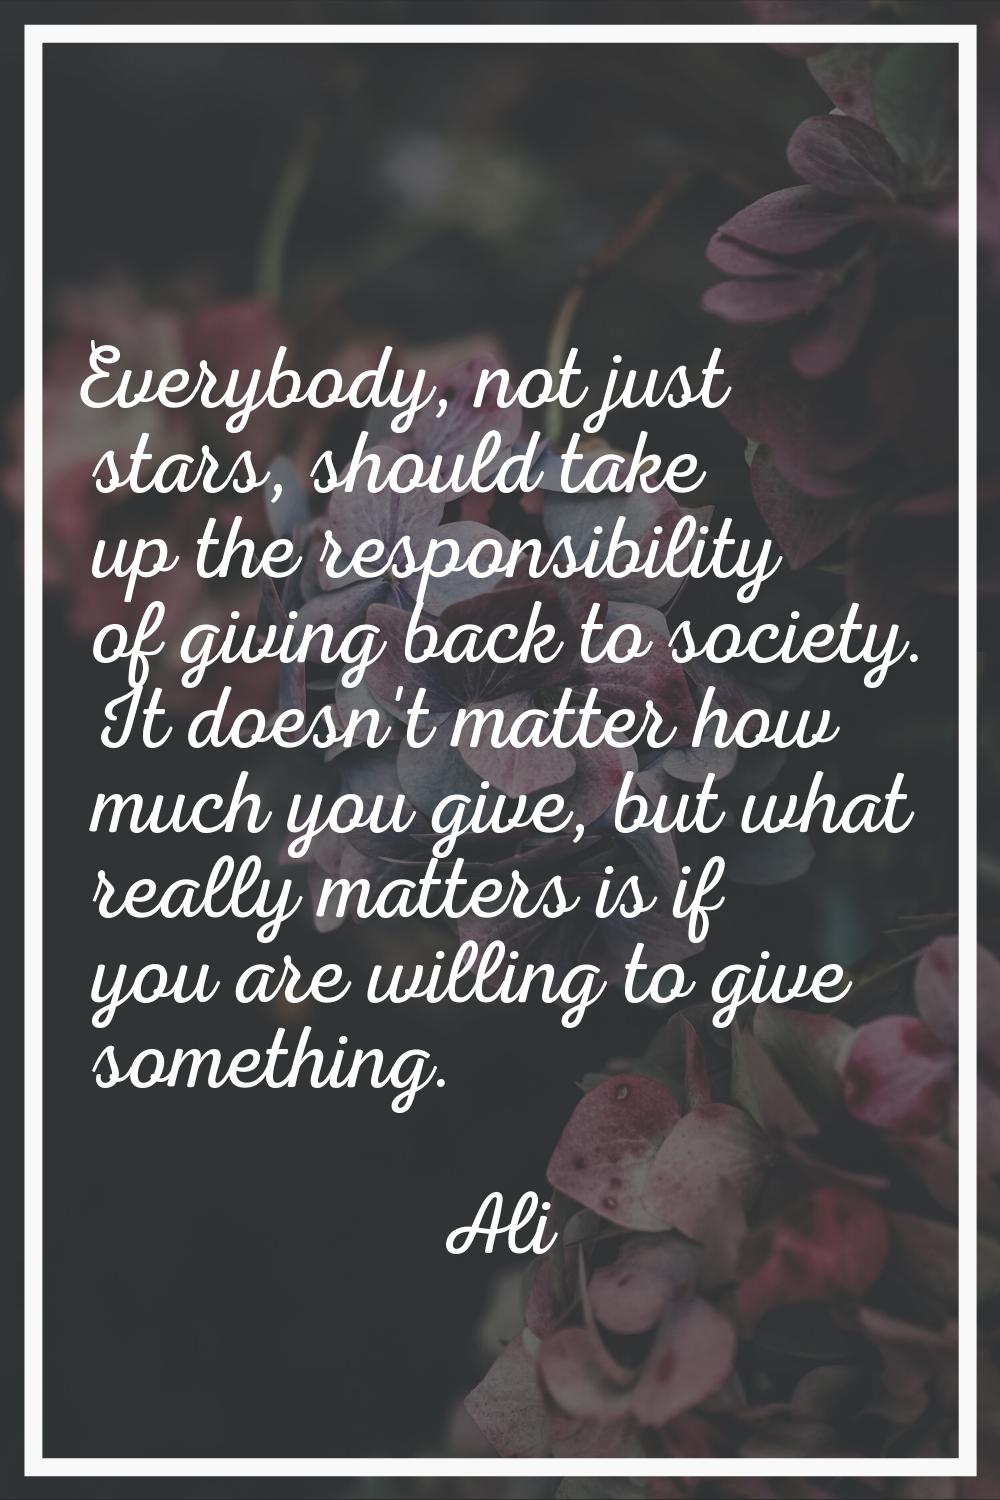 Everybody, not just stars, should take up the responsibility of giving back to society. It doesn't 